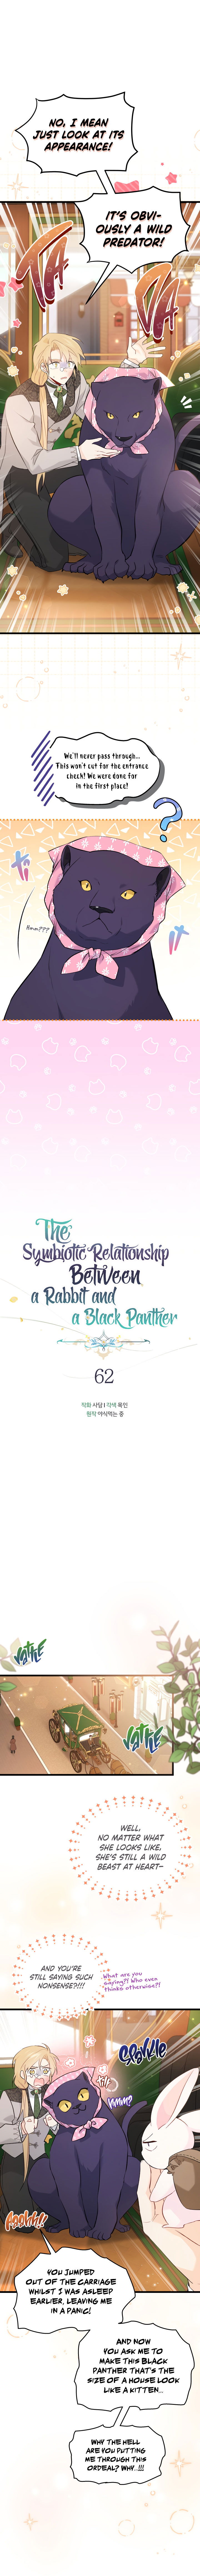 the-symbiotic-relationship-between-a-rabbit-and-a-black-panther-chap-62-3